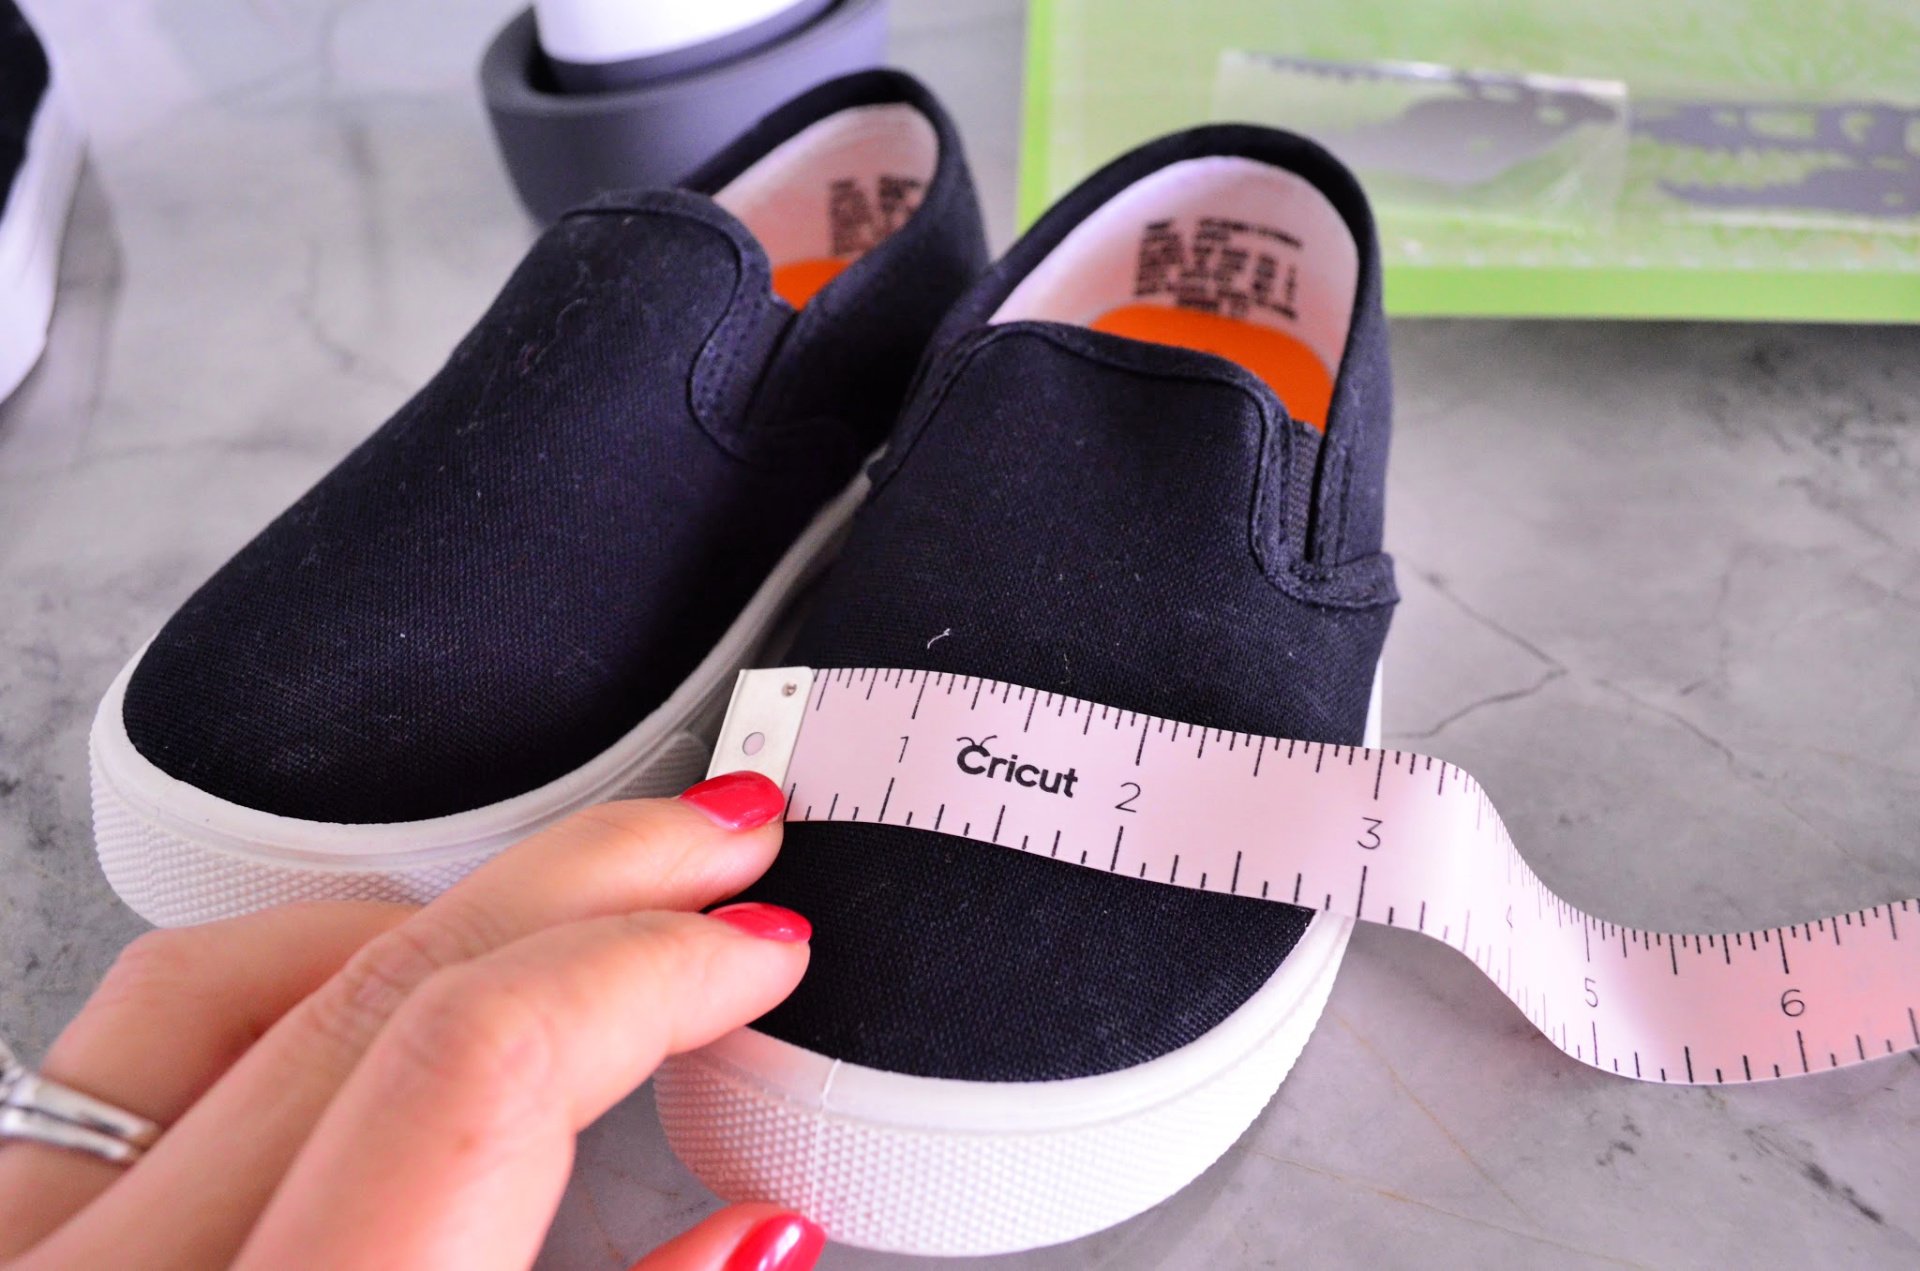 Measure shoes before customizing with Iron-On Vinyl